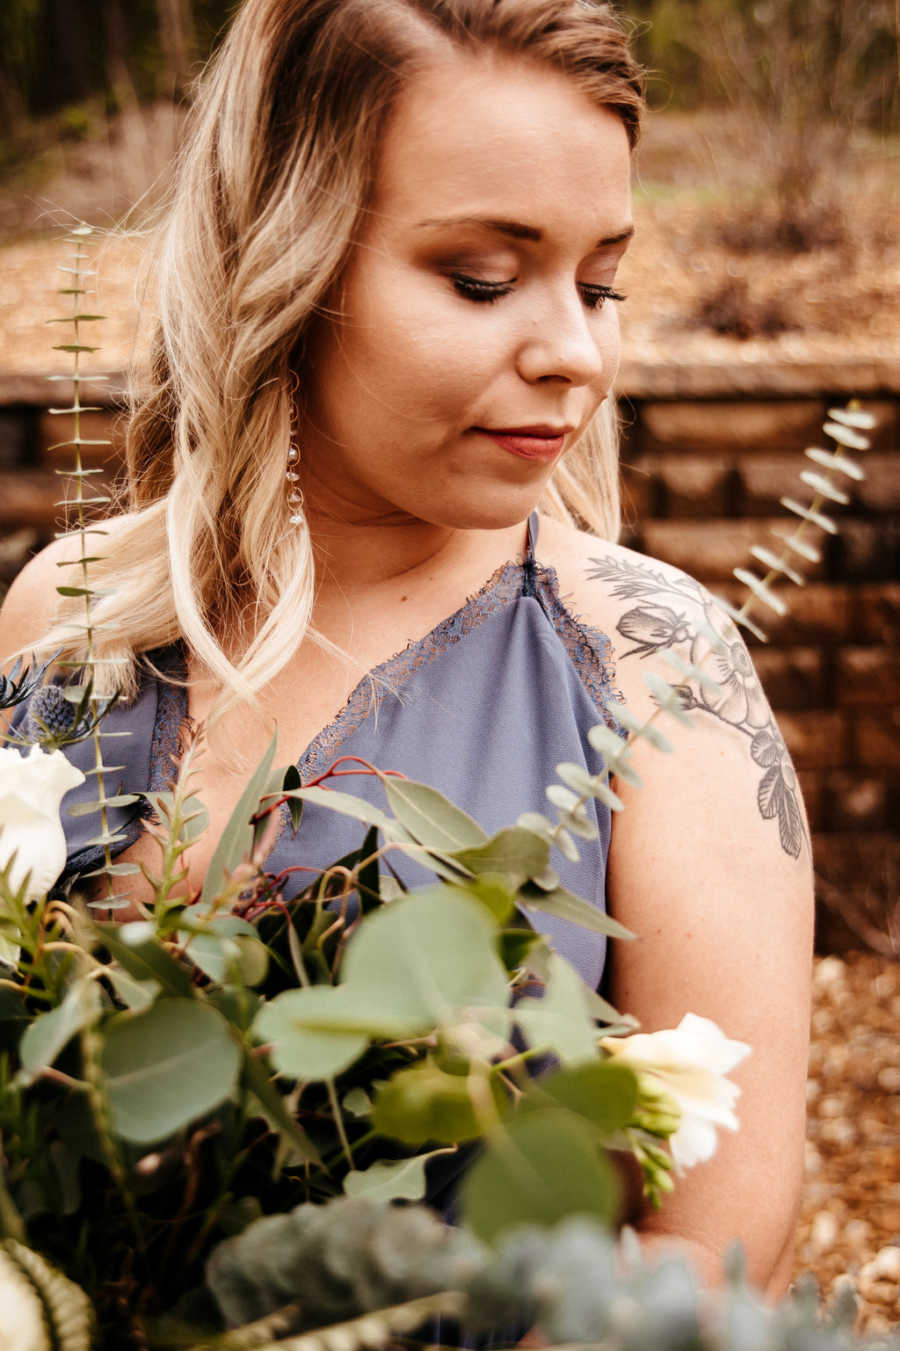 Close up of girlfriend looking down while holding bouquet of flowers